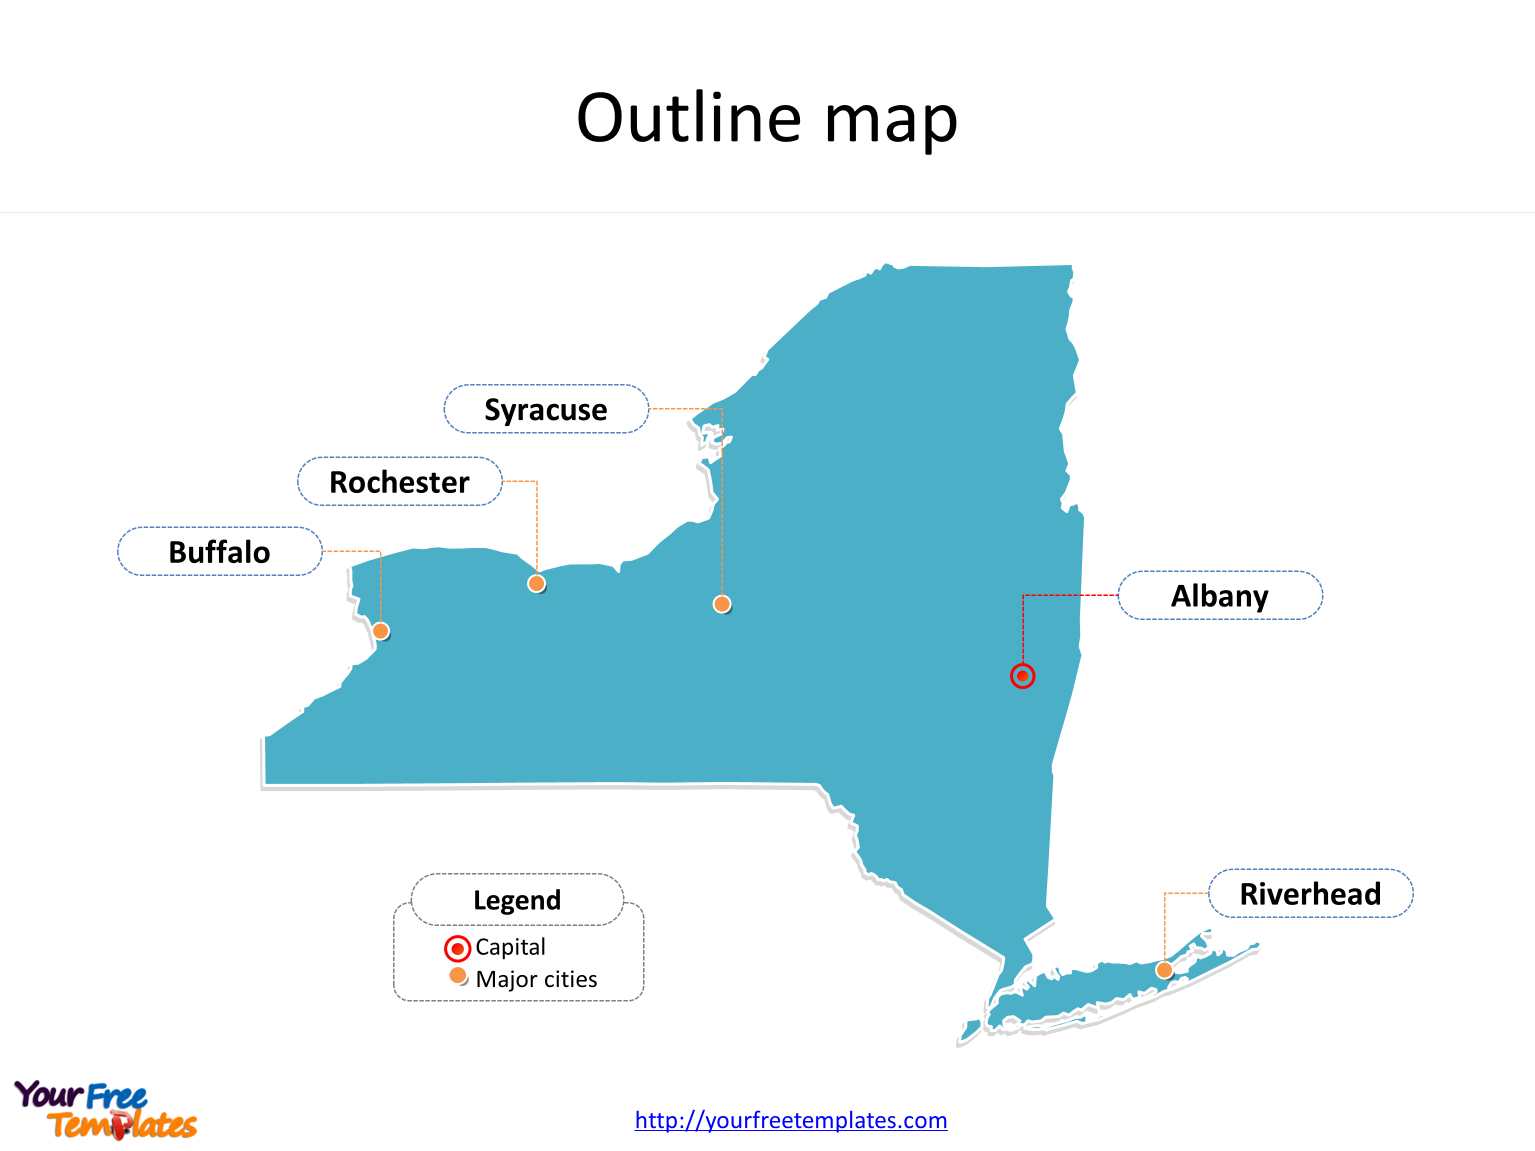 State of New York map with outline and cities labeled on the New York maps PowerPoint templates